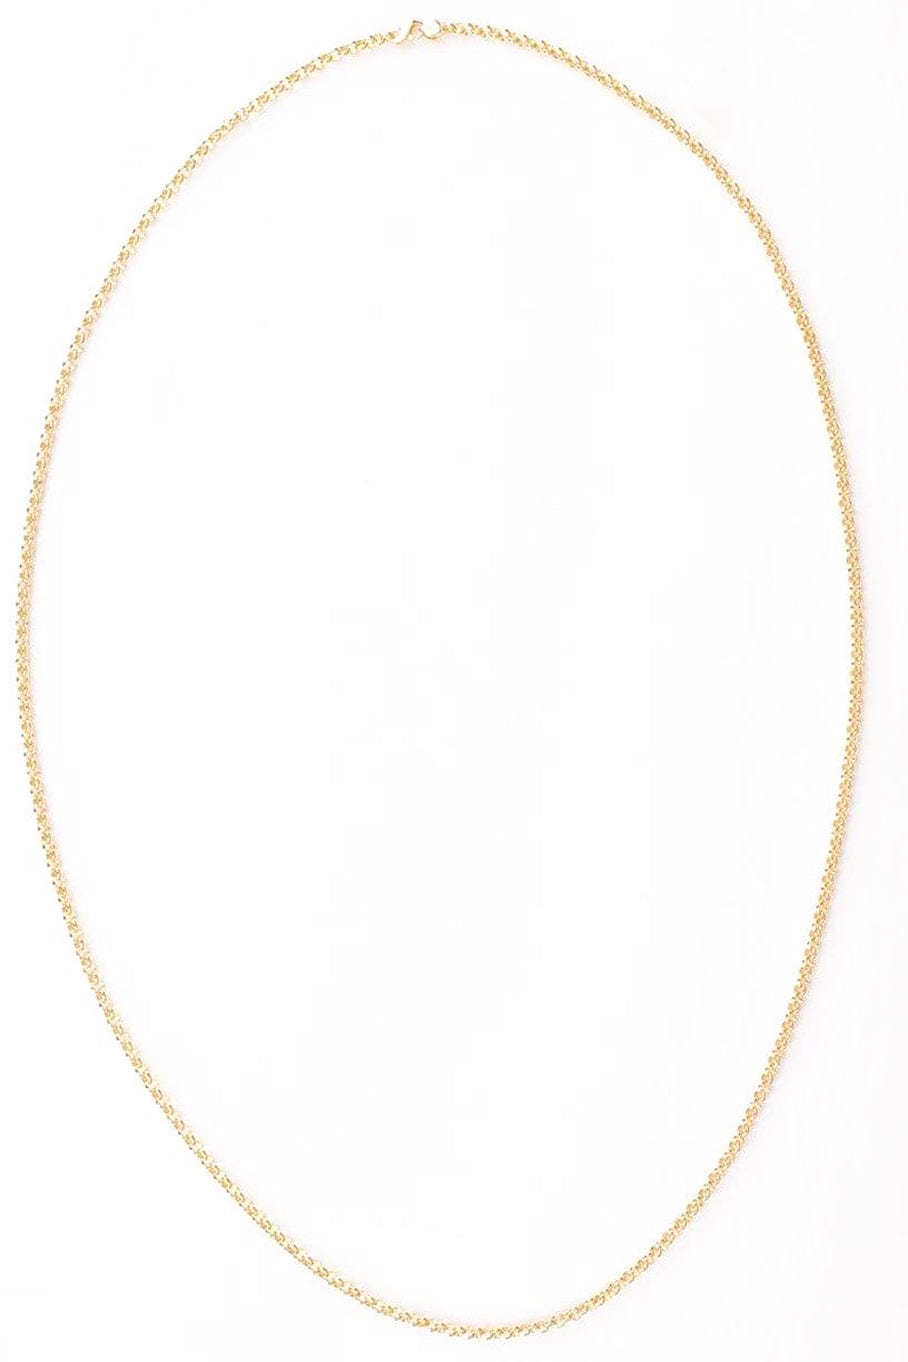 MARISSA DIAMONDS-36 Inch 3.0MM Yellow Gold Round Cable Chain-YELLOW GOLD